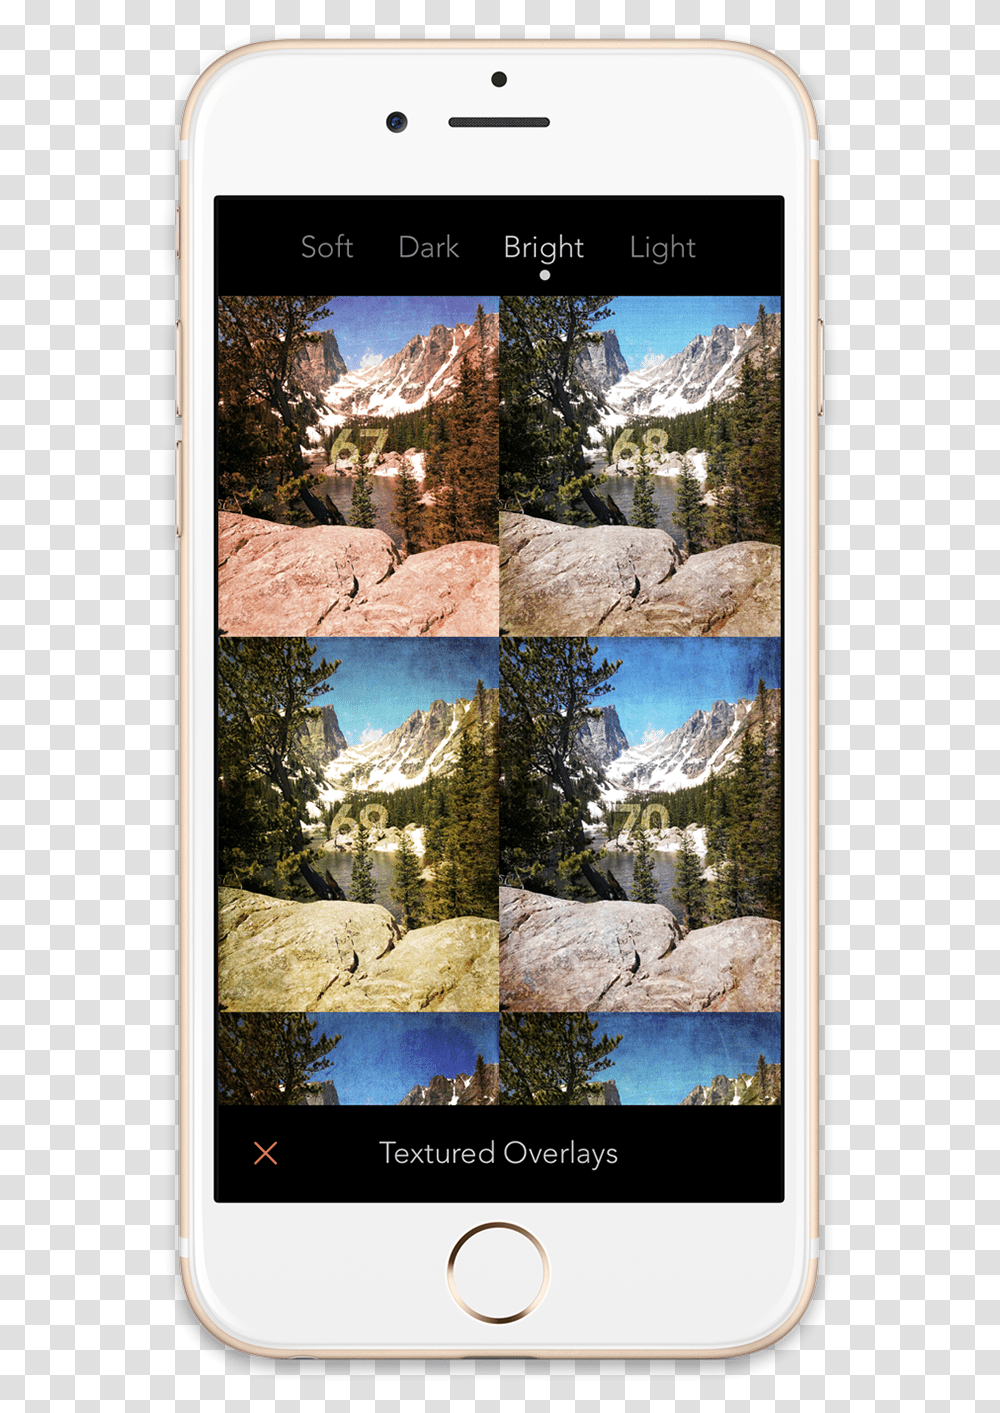 Over 150 Vintage Film Grains And Overlays Vintage Filter In Iphone, Mobile Phone, Mountain, Outdoors, Nature Transparent Png